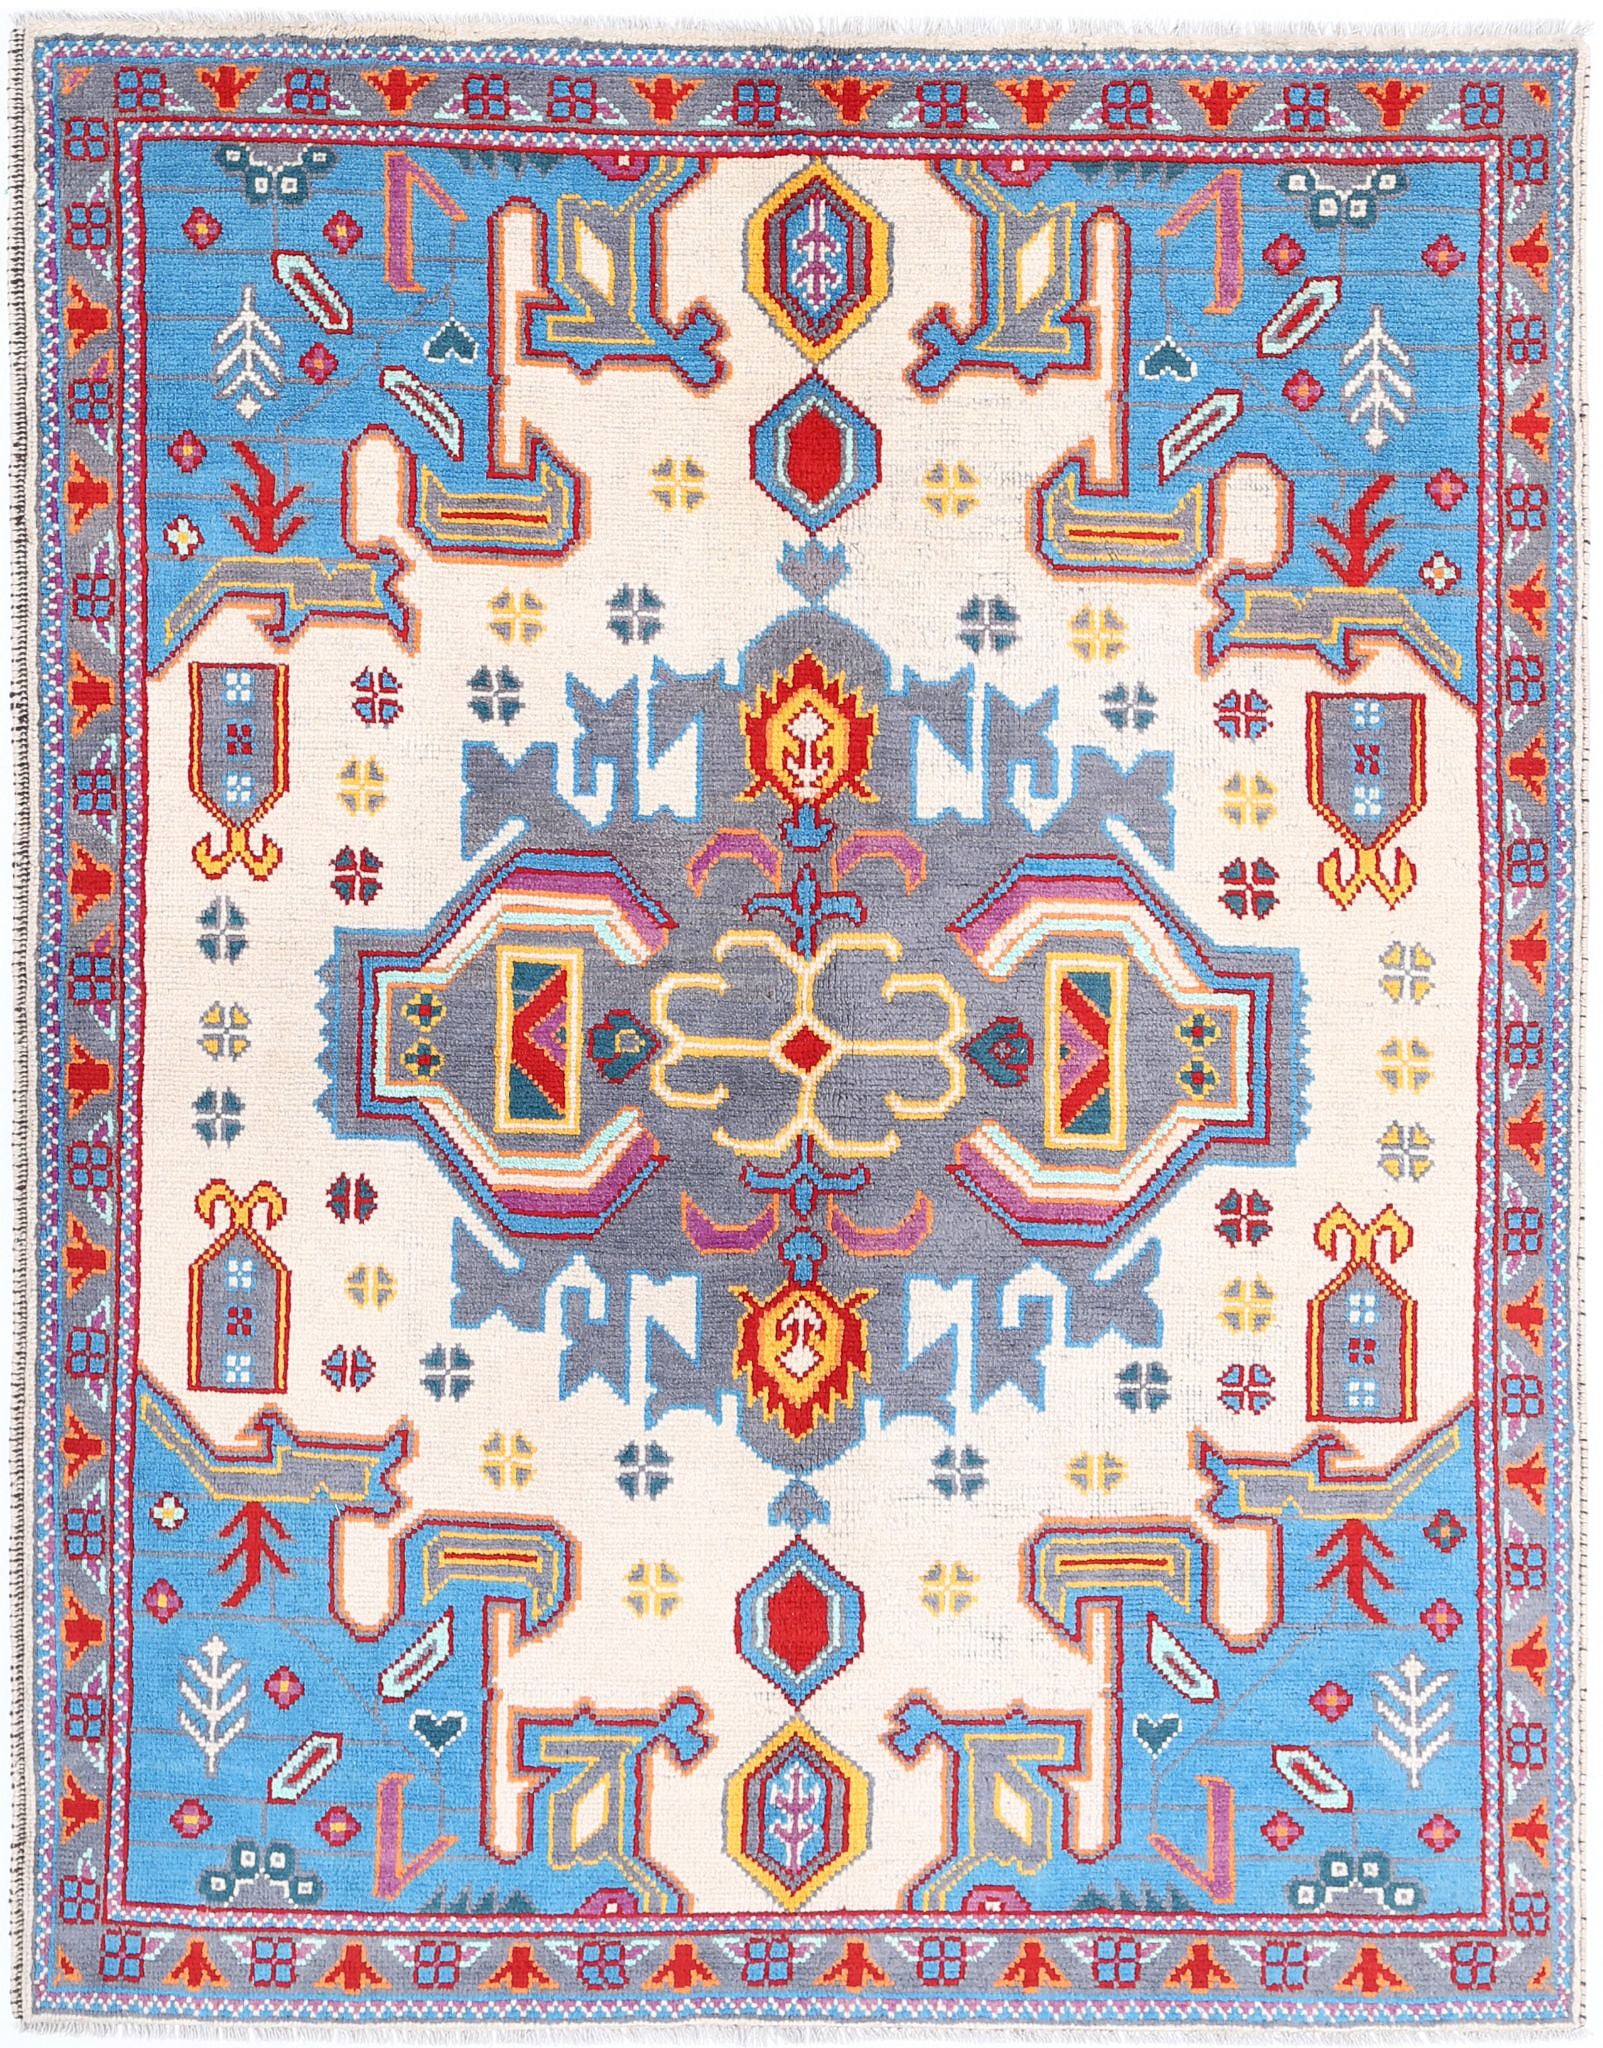 Revival-hand-knotted-qarghani-wool-rug-5014083.jpg